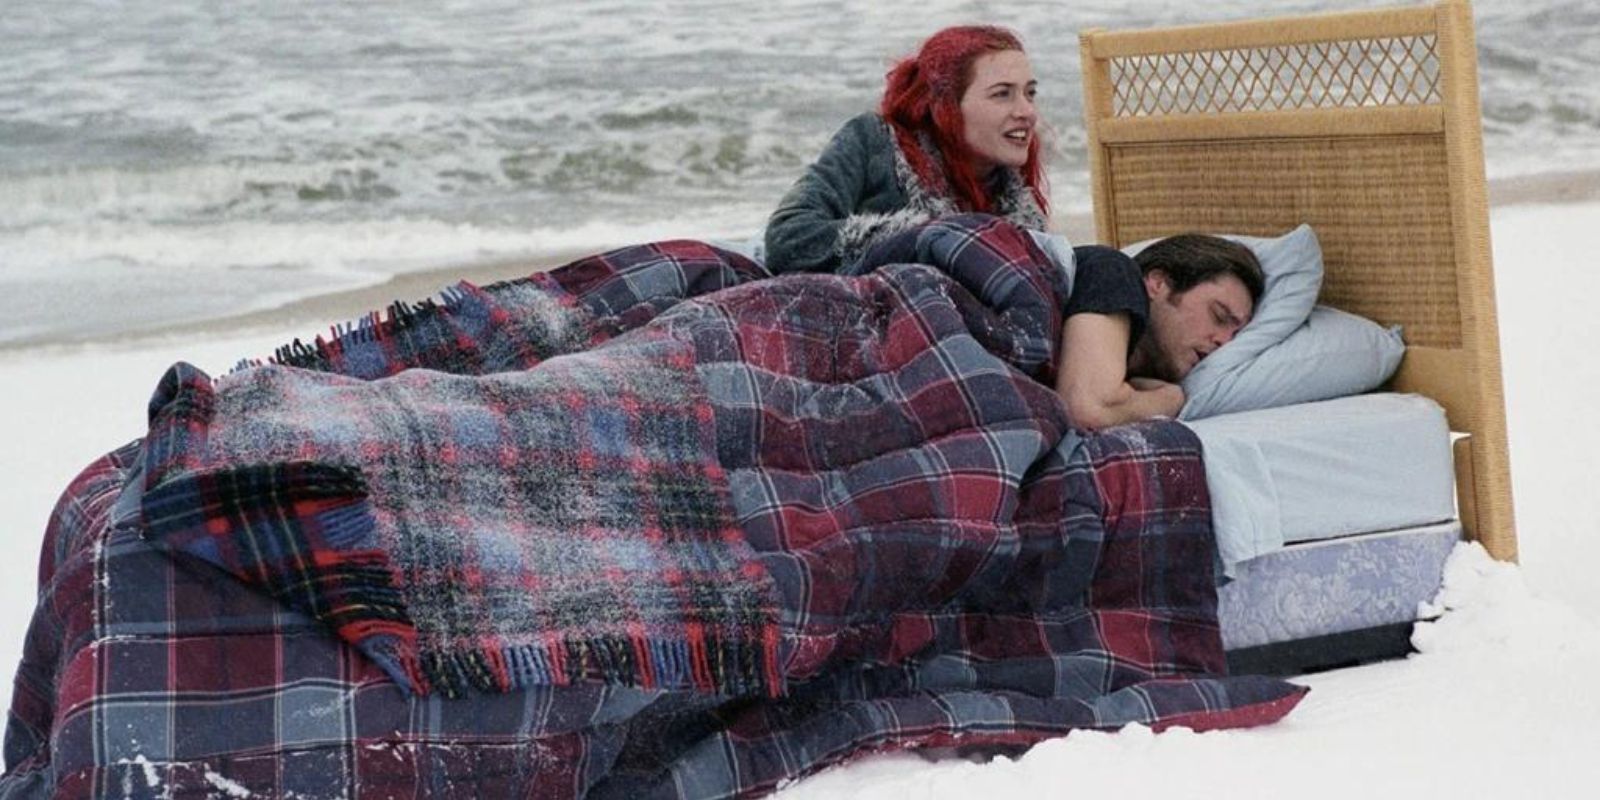 Joel and Clementine laying on a bed outside in the snow